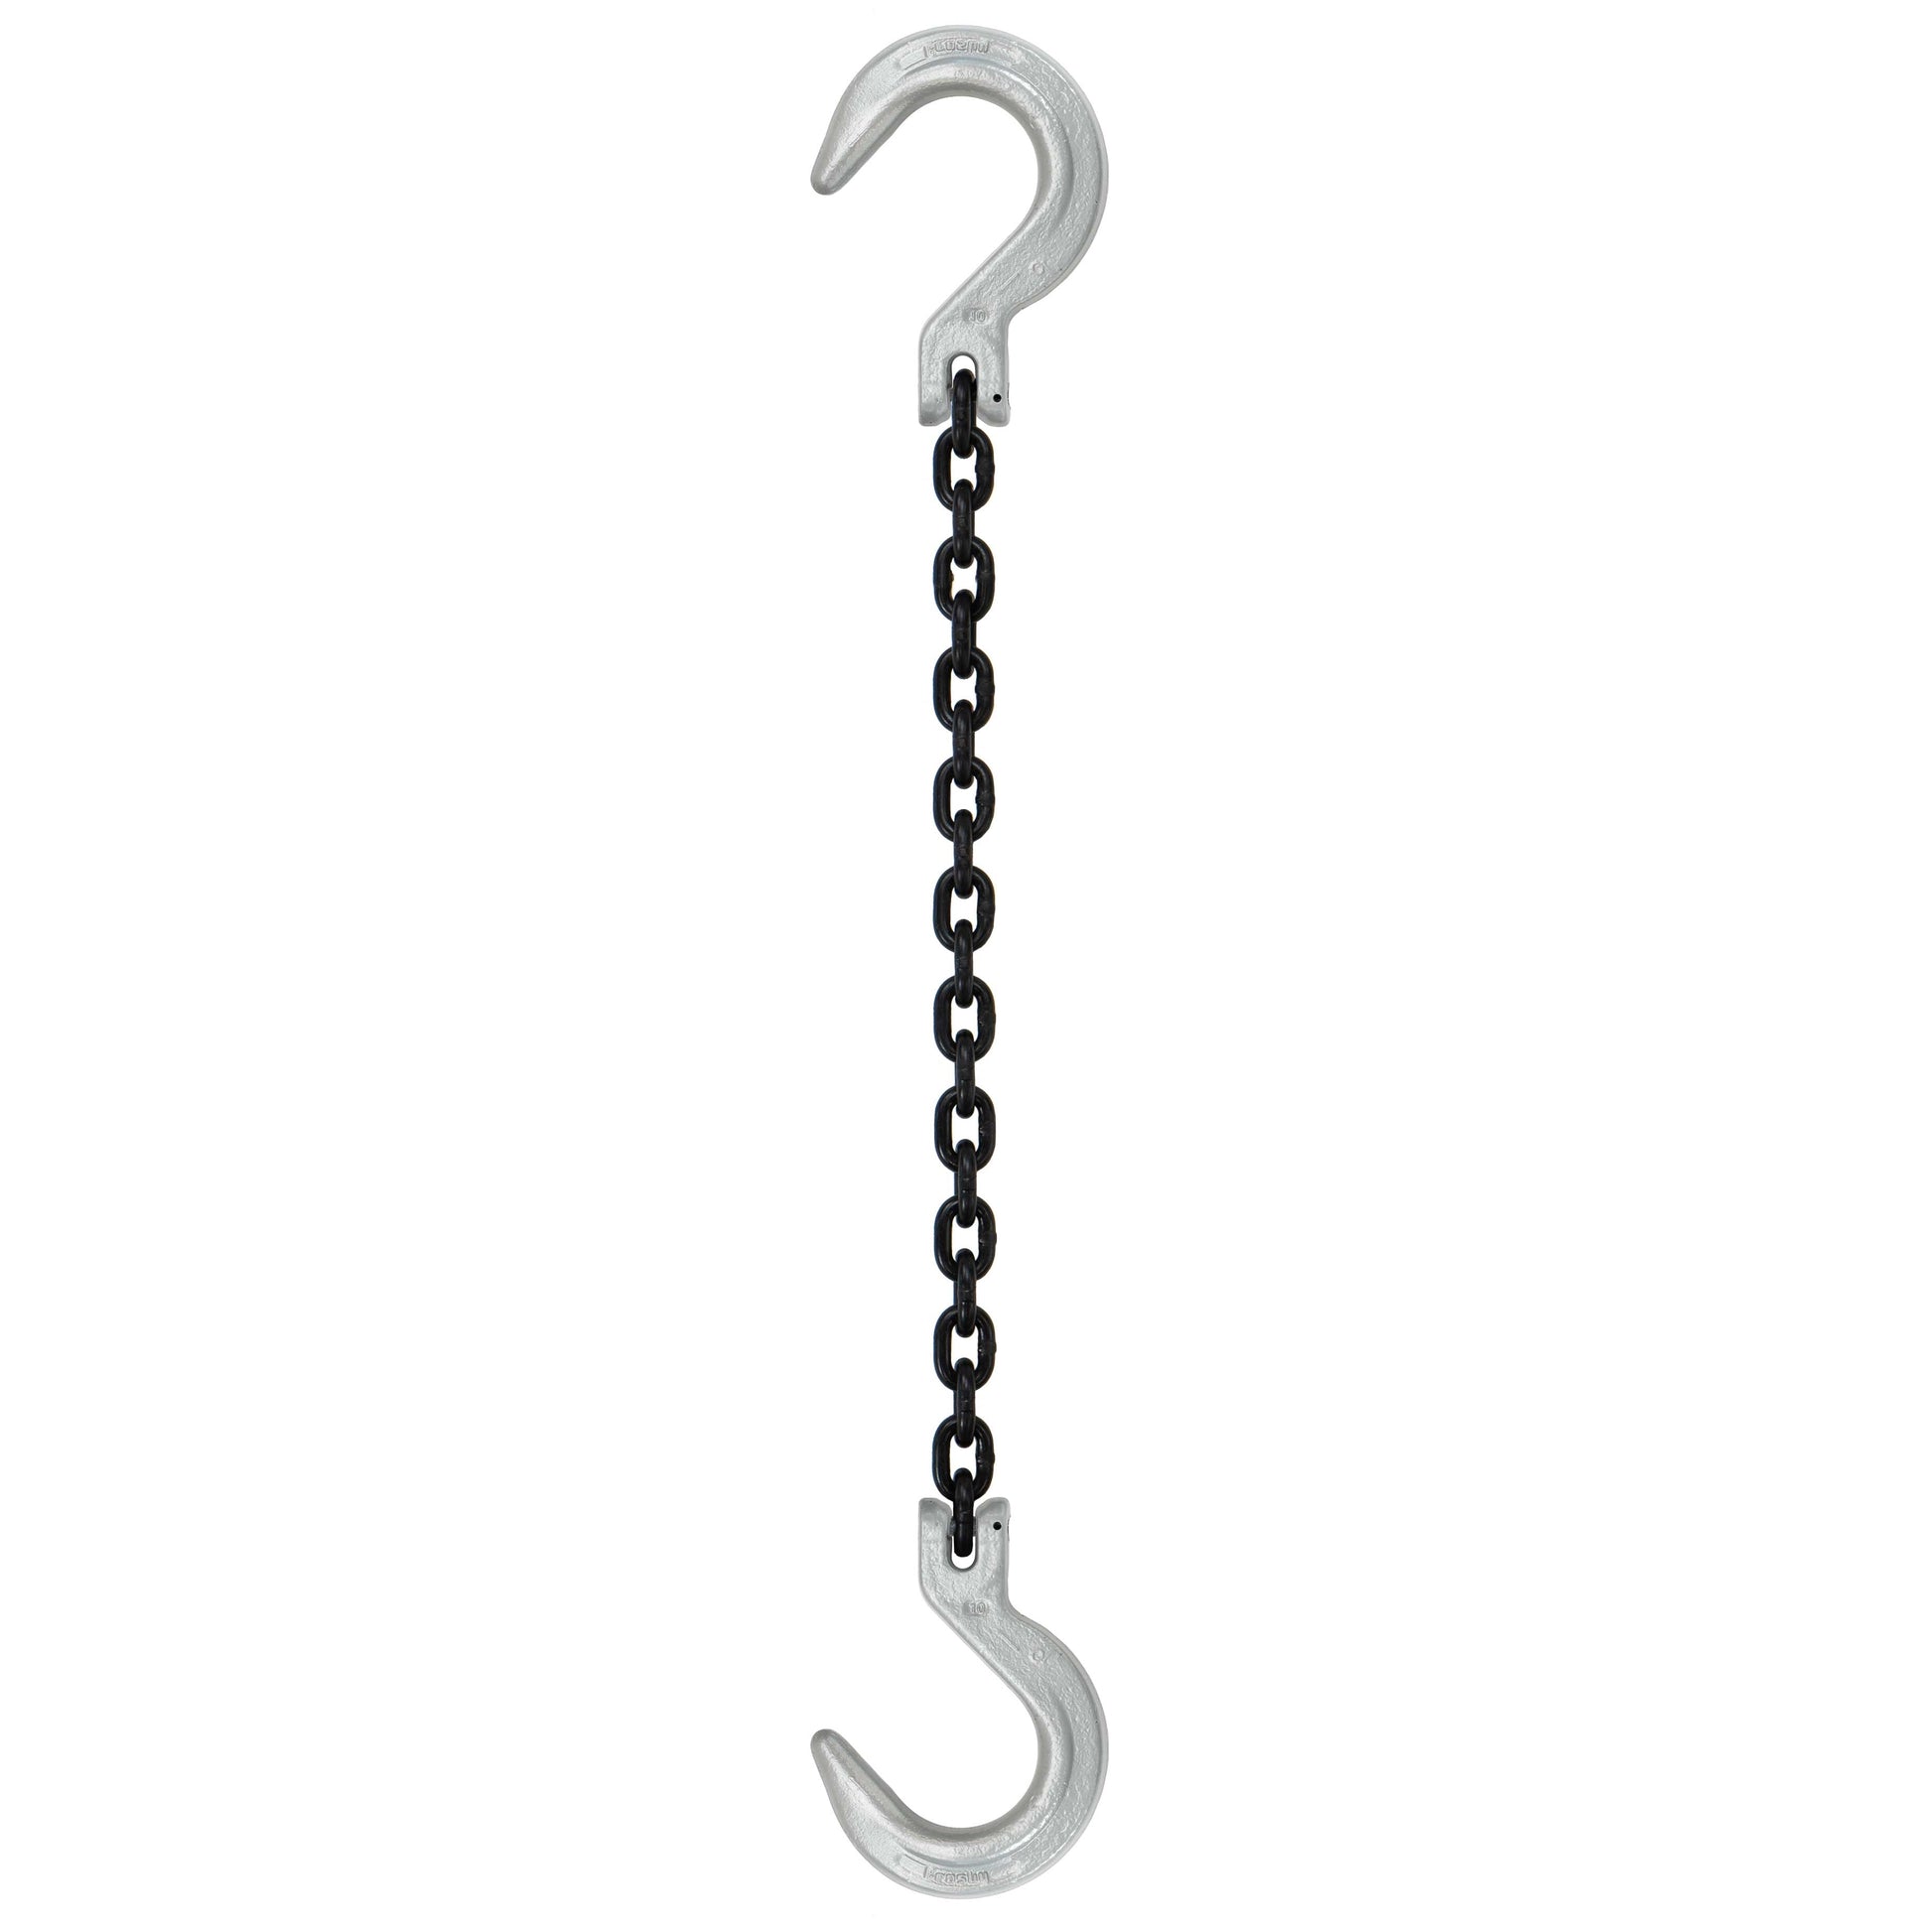 932 inch x 8 foot Domestic Single Leg Chain Sling w Crosby Foundry & Foundry Hooks Grade 100 image 1 of 2